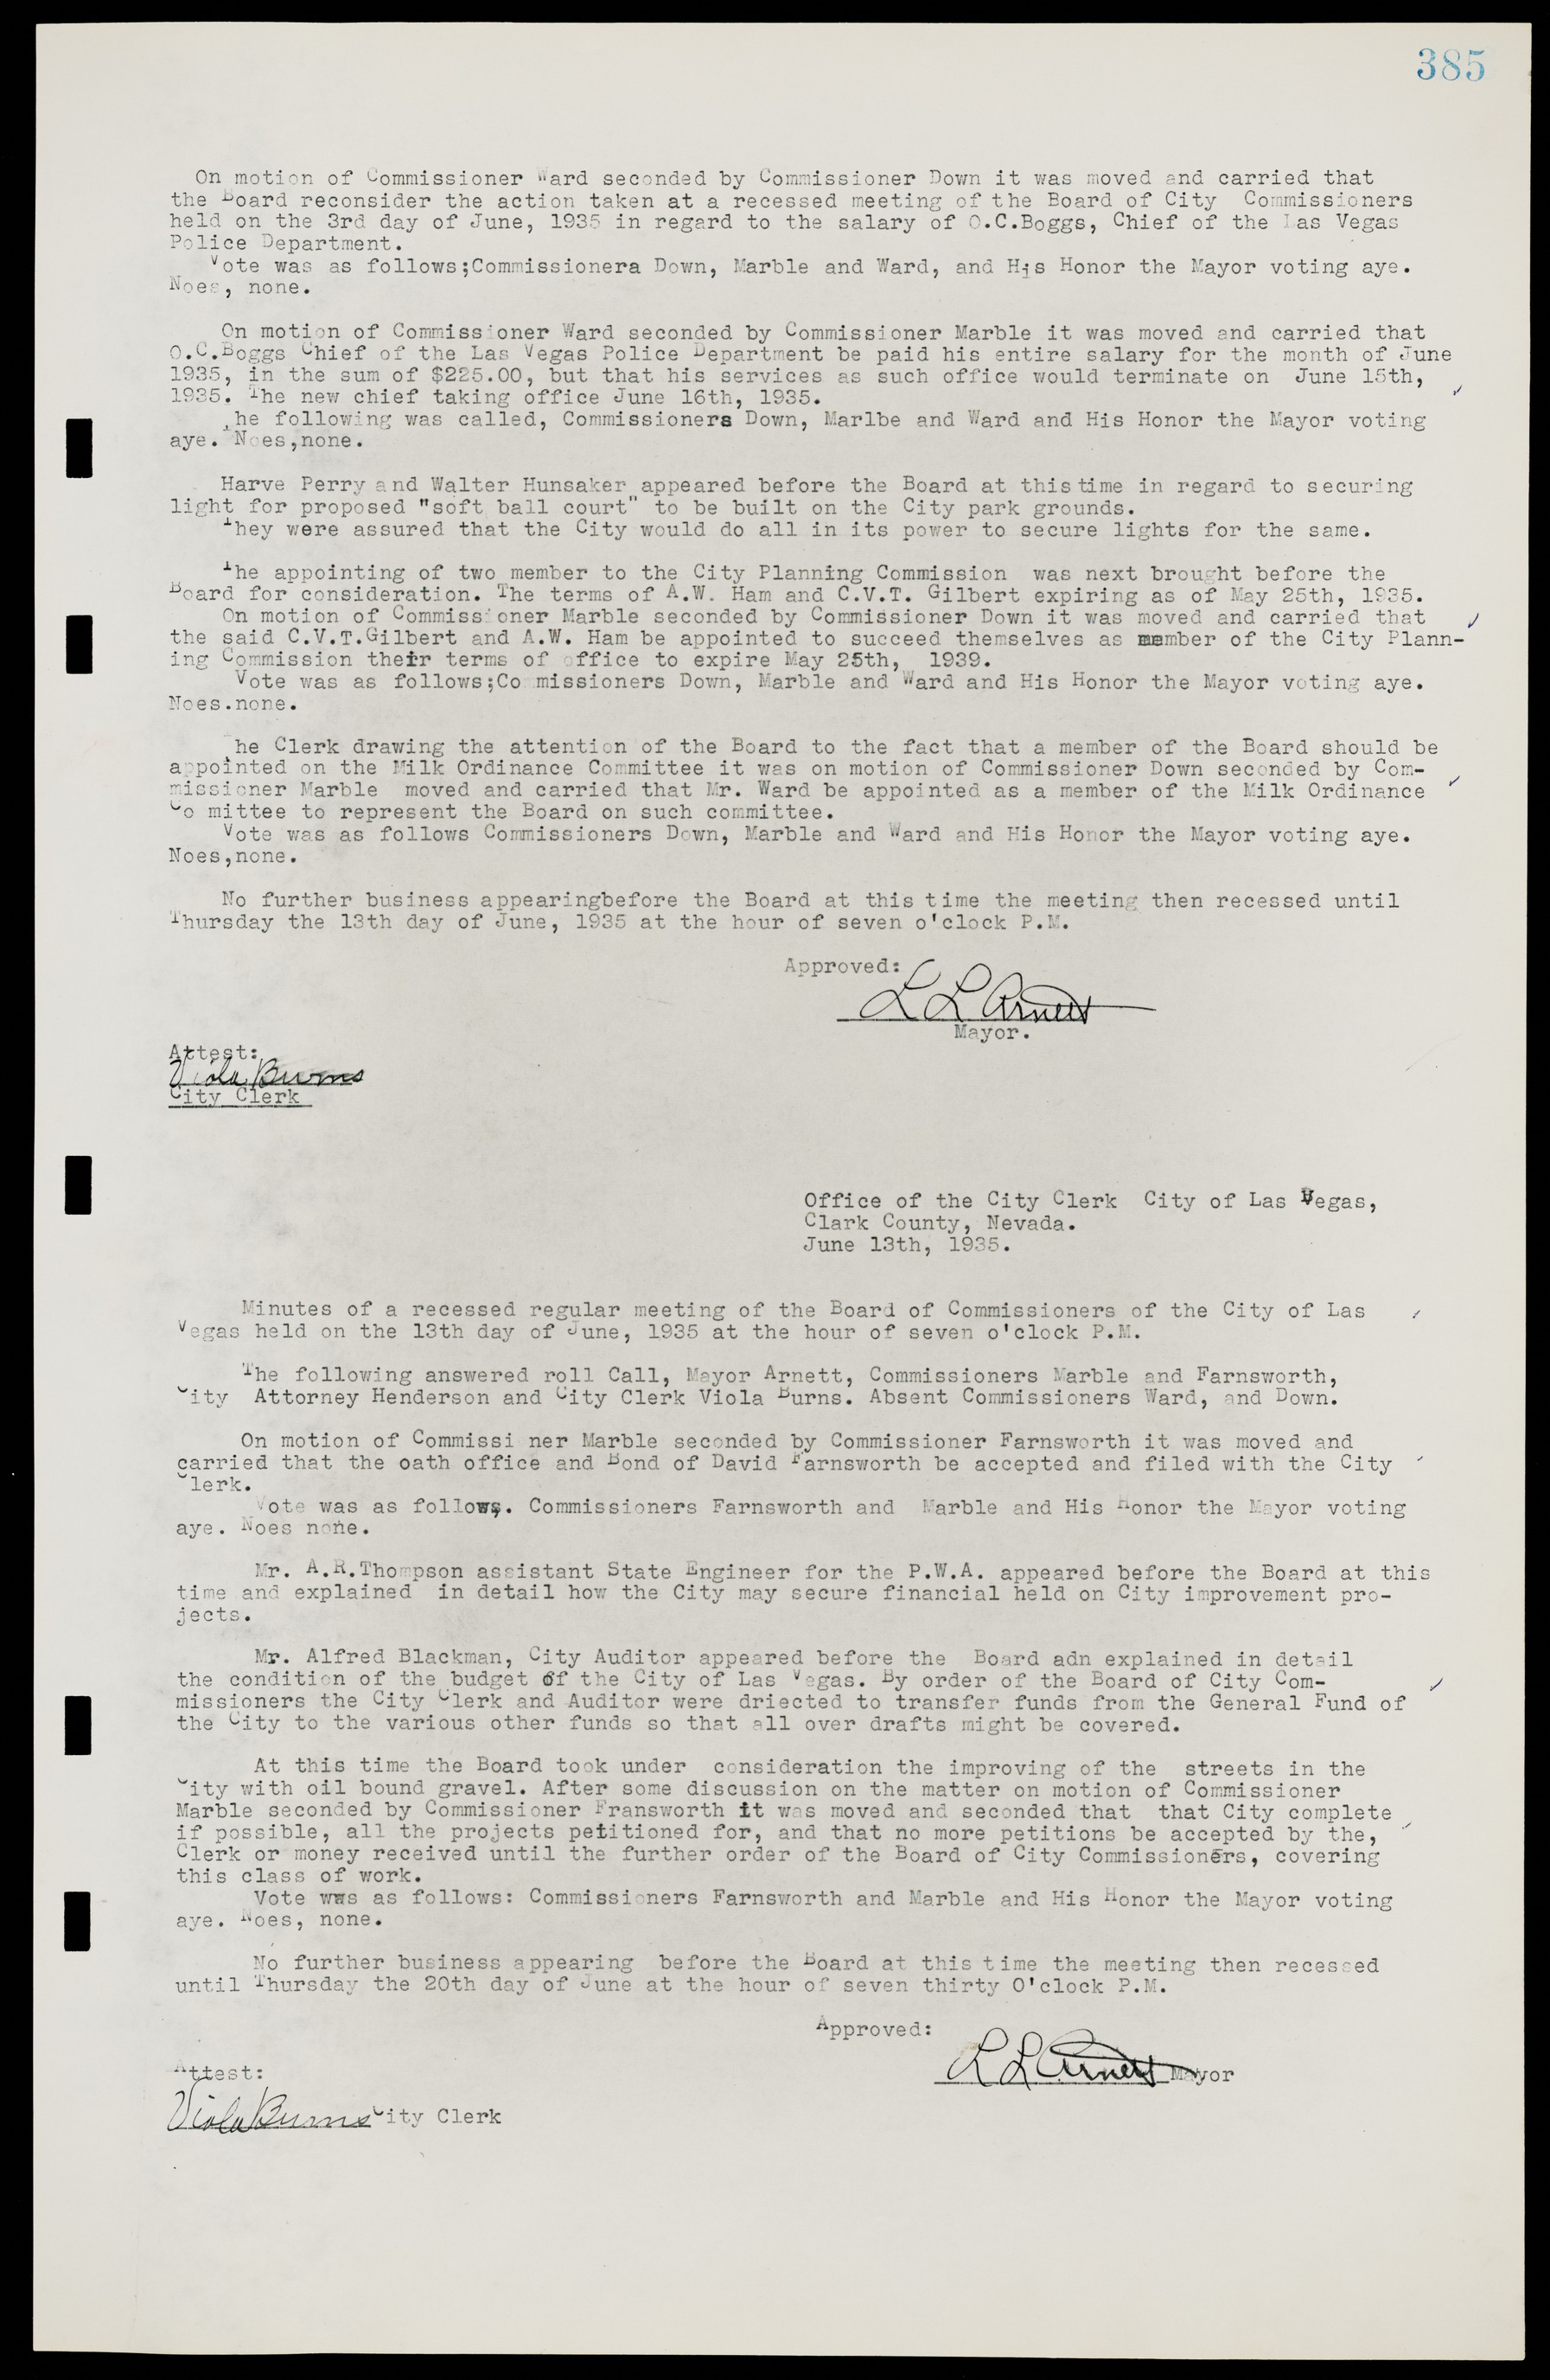 Las Vegas City Commission Minutes, May 14, 1929 to February 11, 1937, lvc000003-392